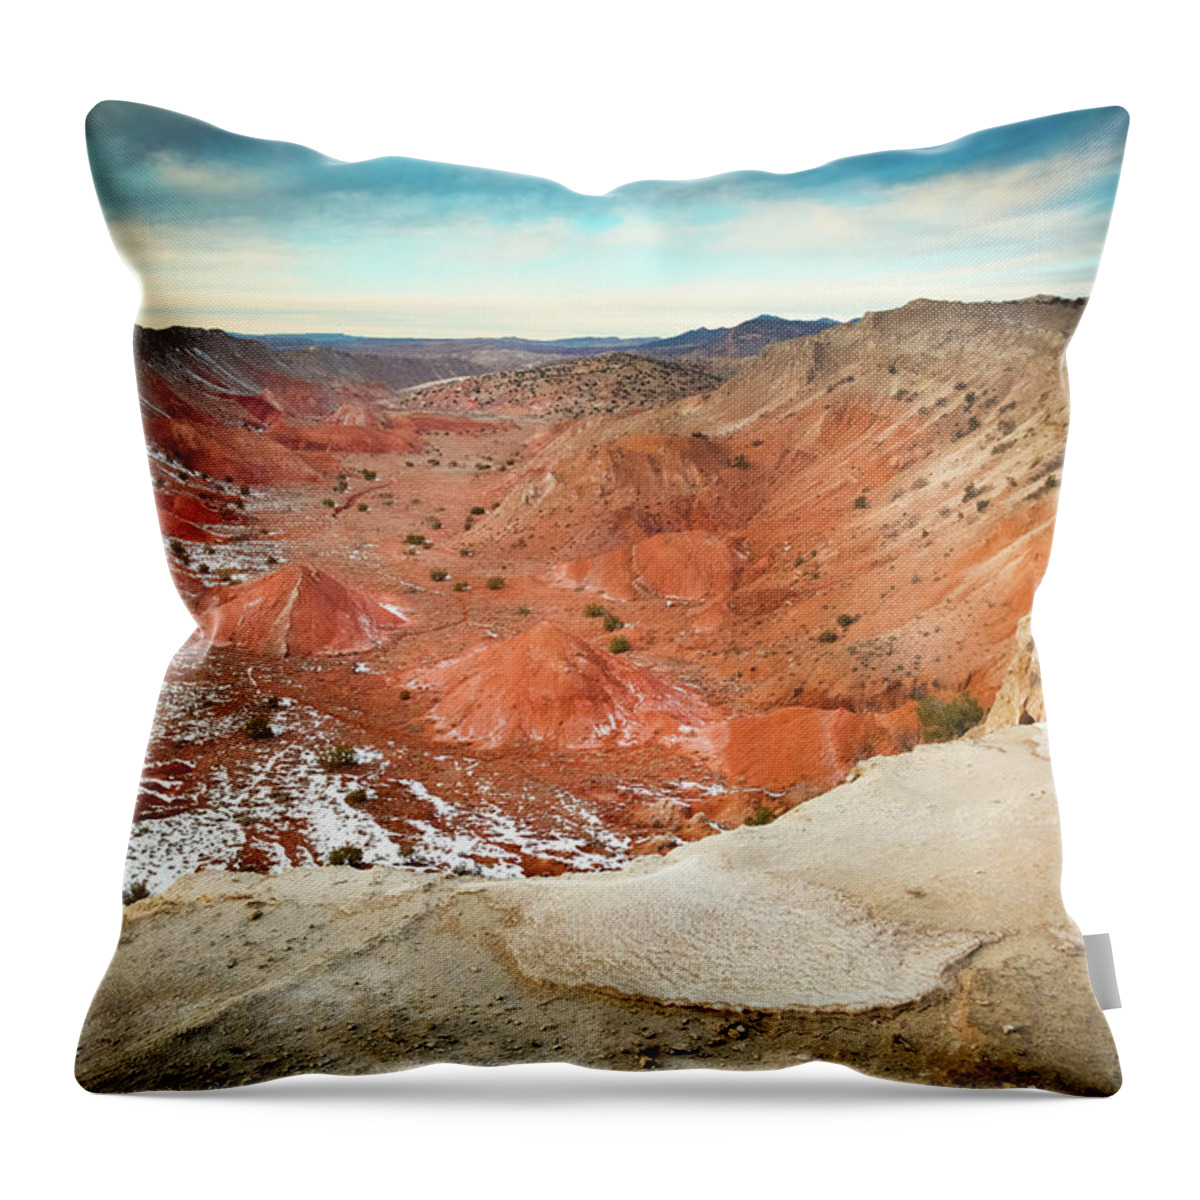 Scenics Throw Pillow featuring the photograph Desert Badlands Landscape by Amygdala imagery